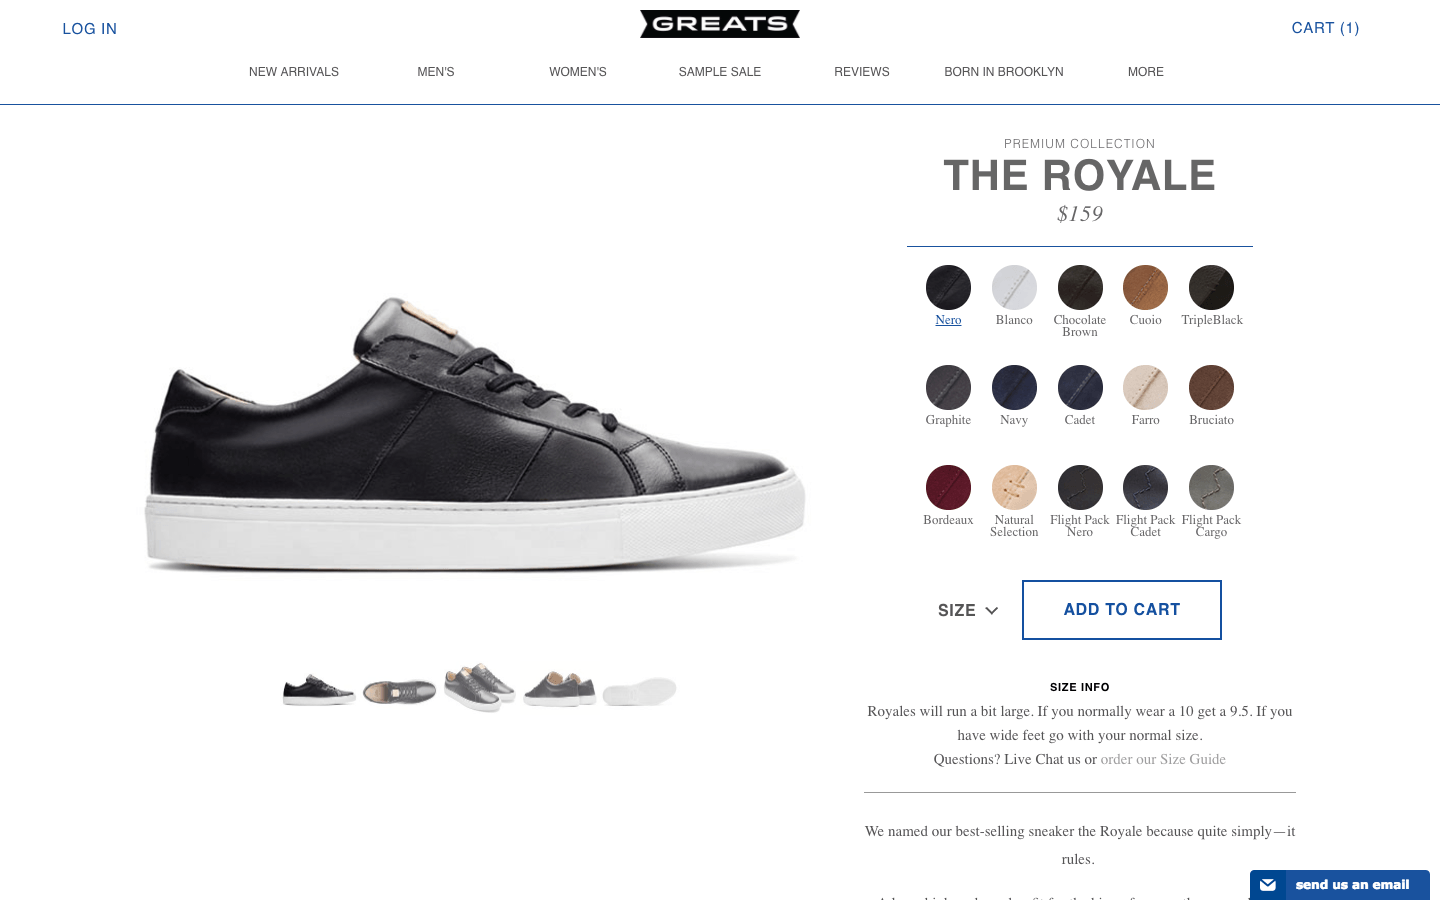 GREATS shoe product page